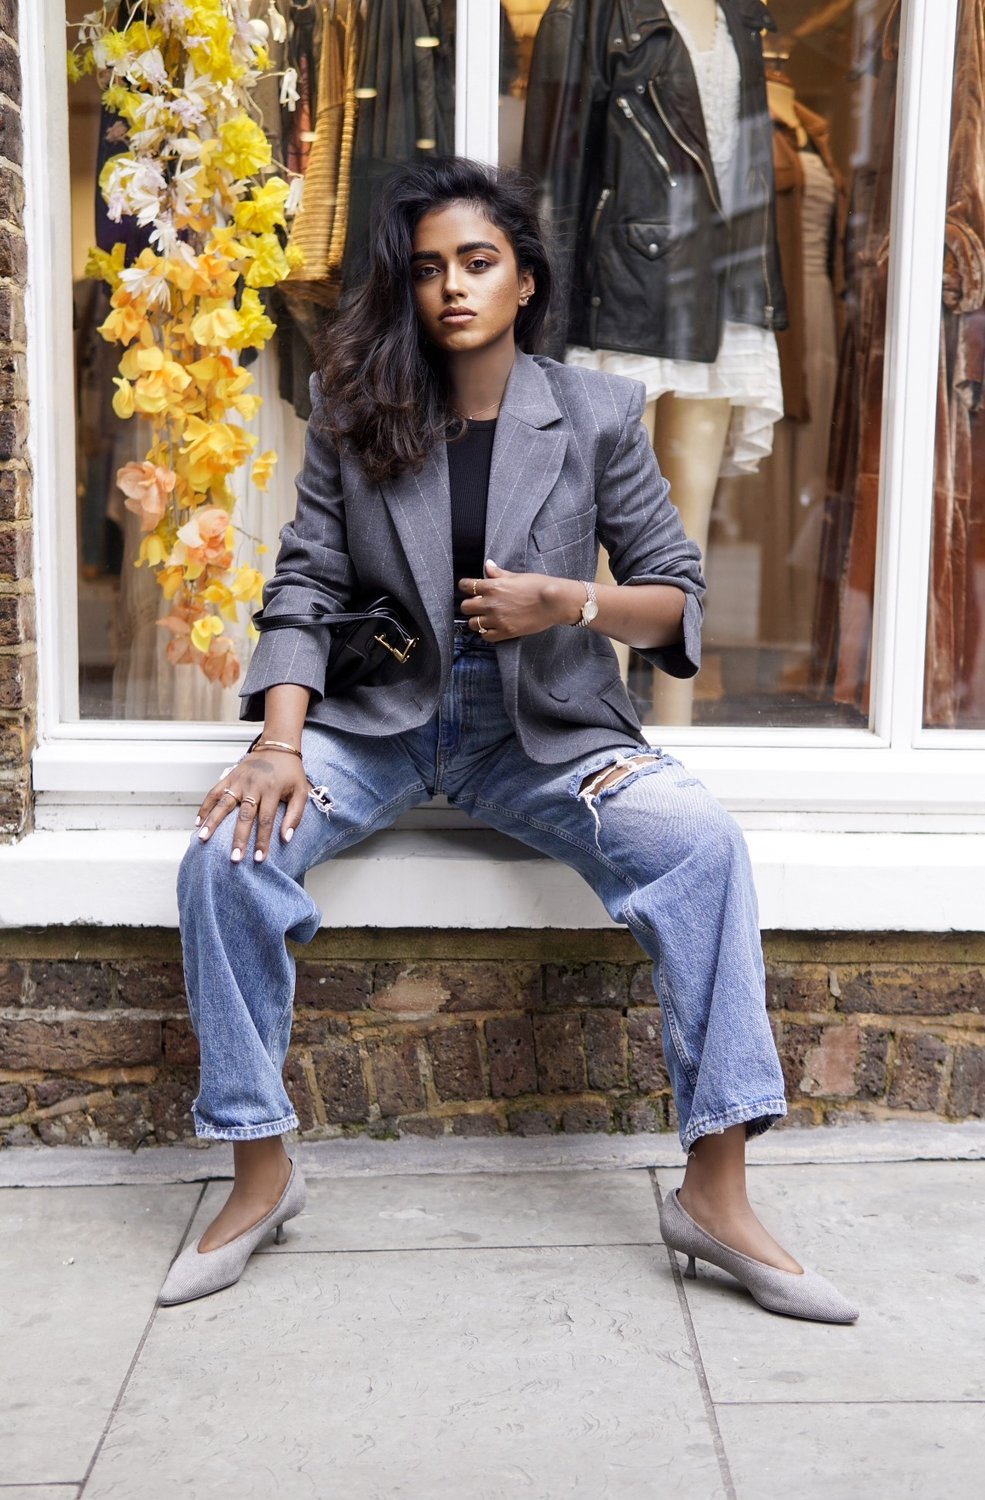 Sachini sitting in front of a shop window wearing a grey blazer, blue ripped jeans, a black Dior saddle bag and grey Vivaia shoes